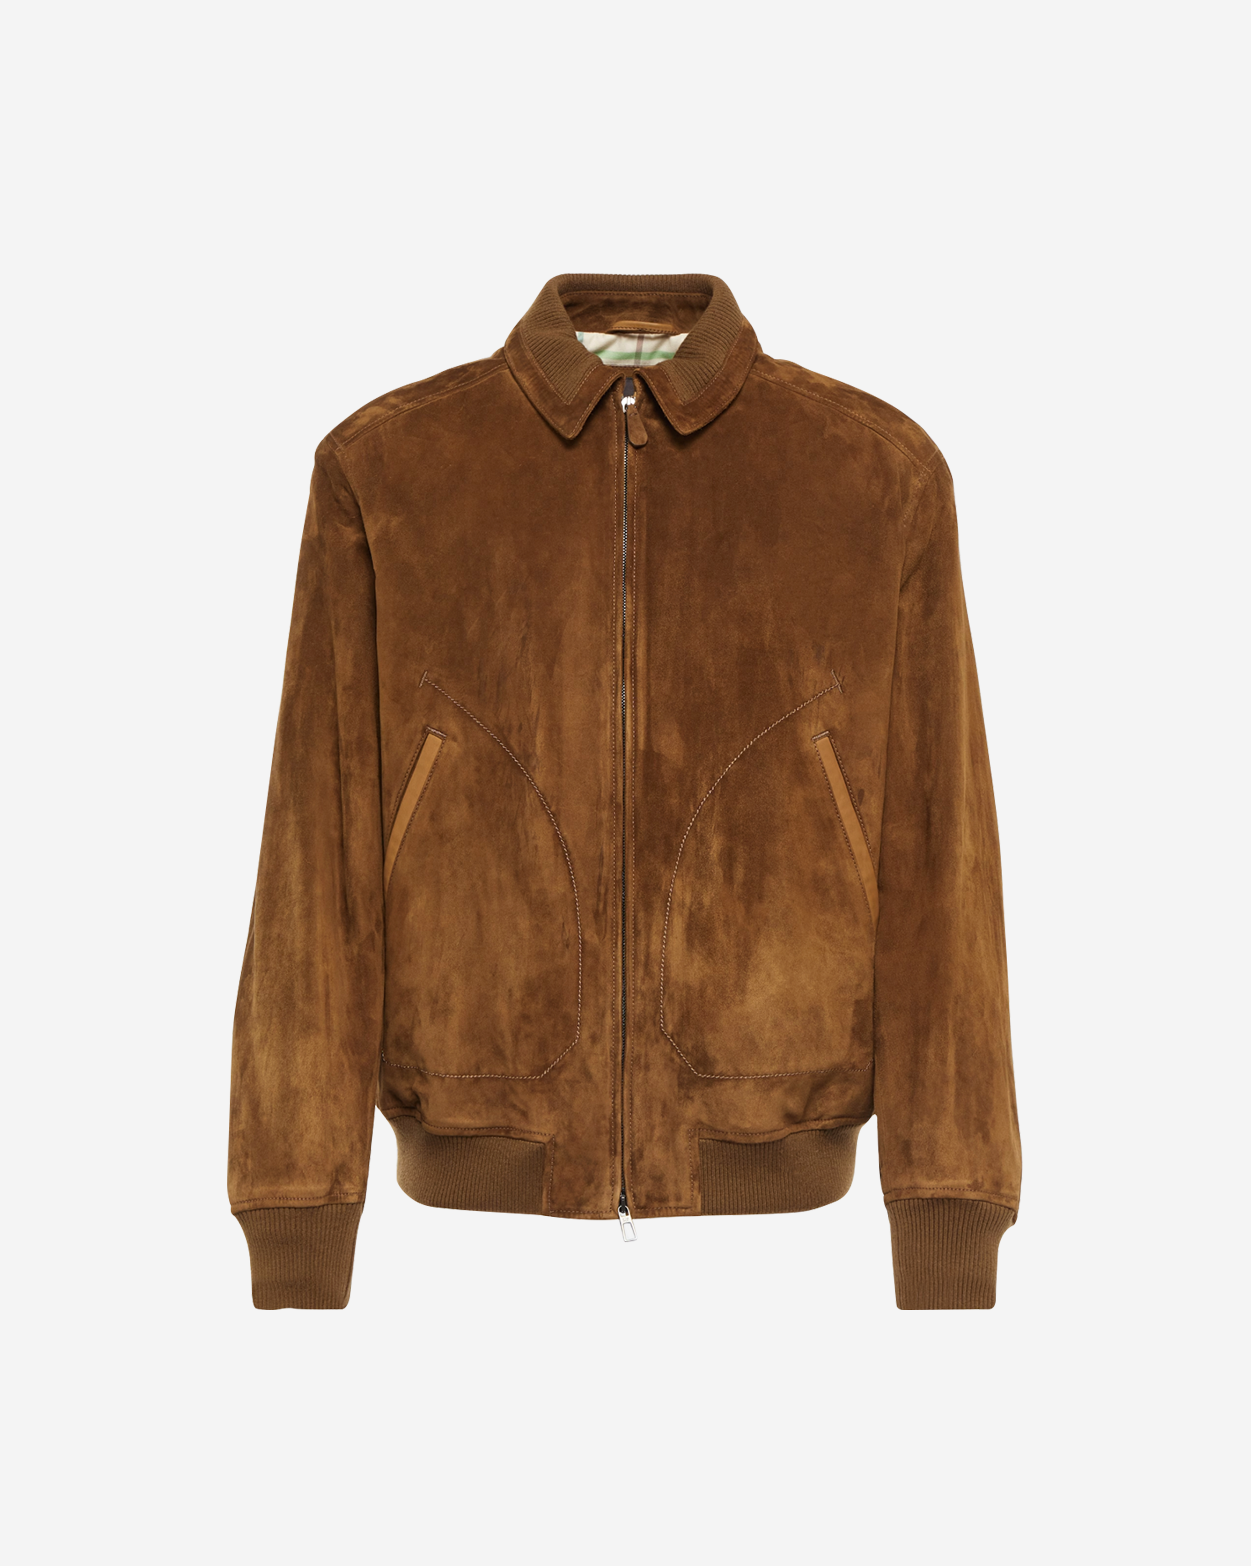 Why you should own a suede jacket, and the best to buy